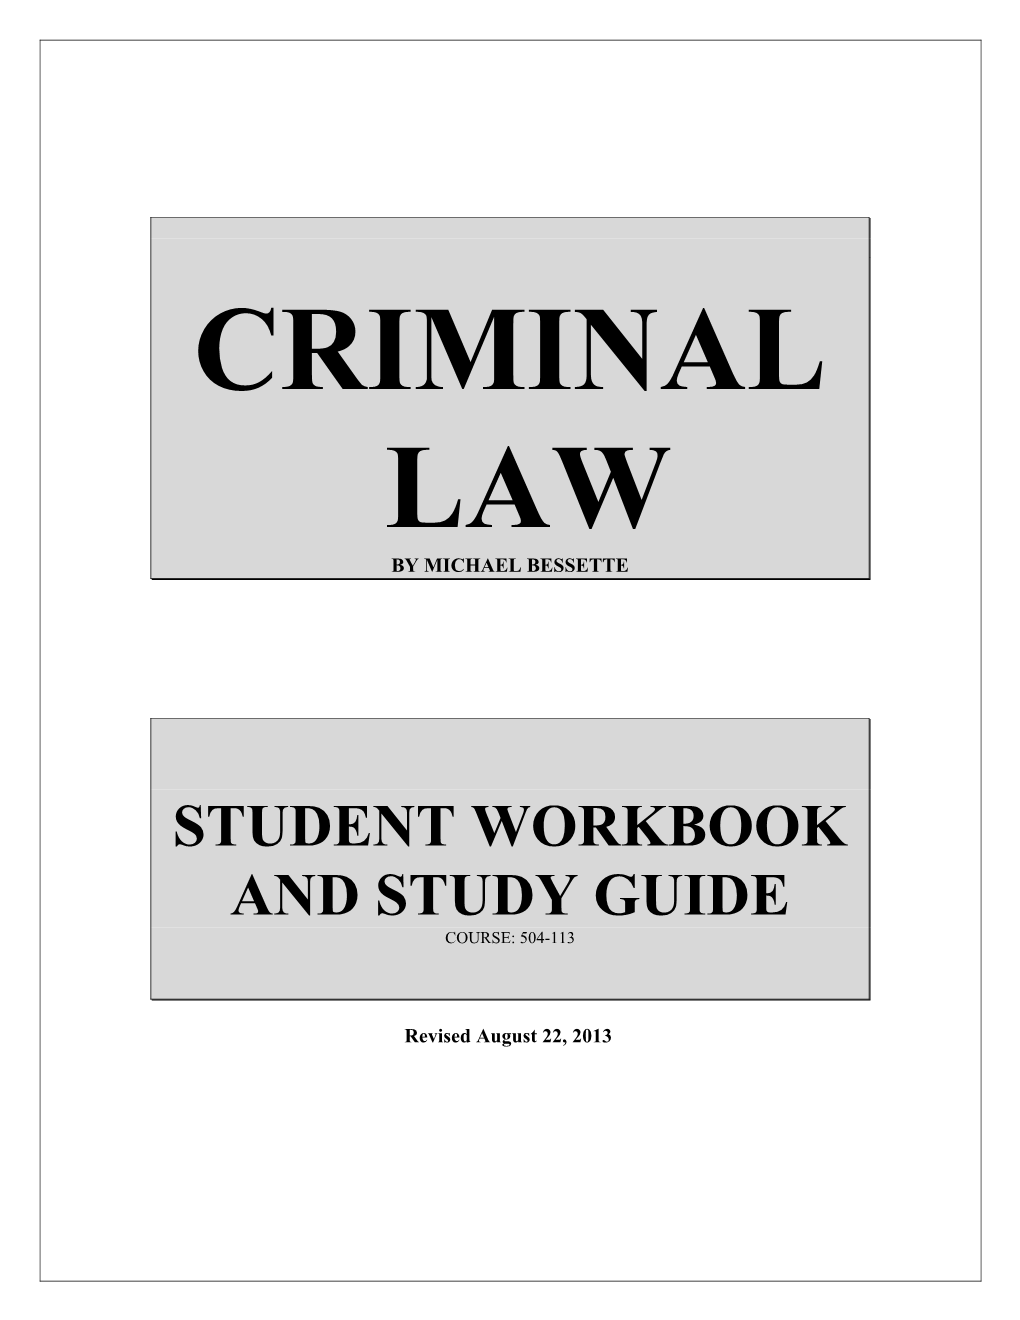 Student Workbook and Study Guide